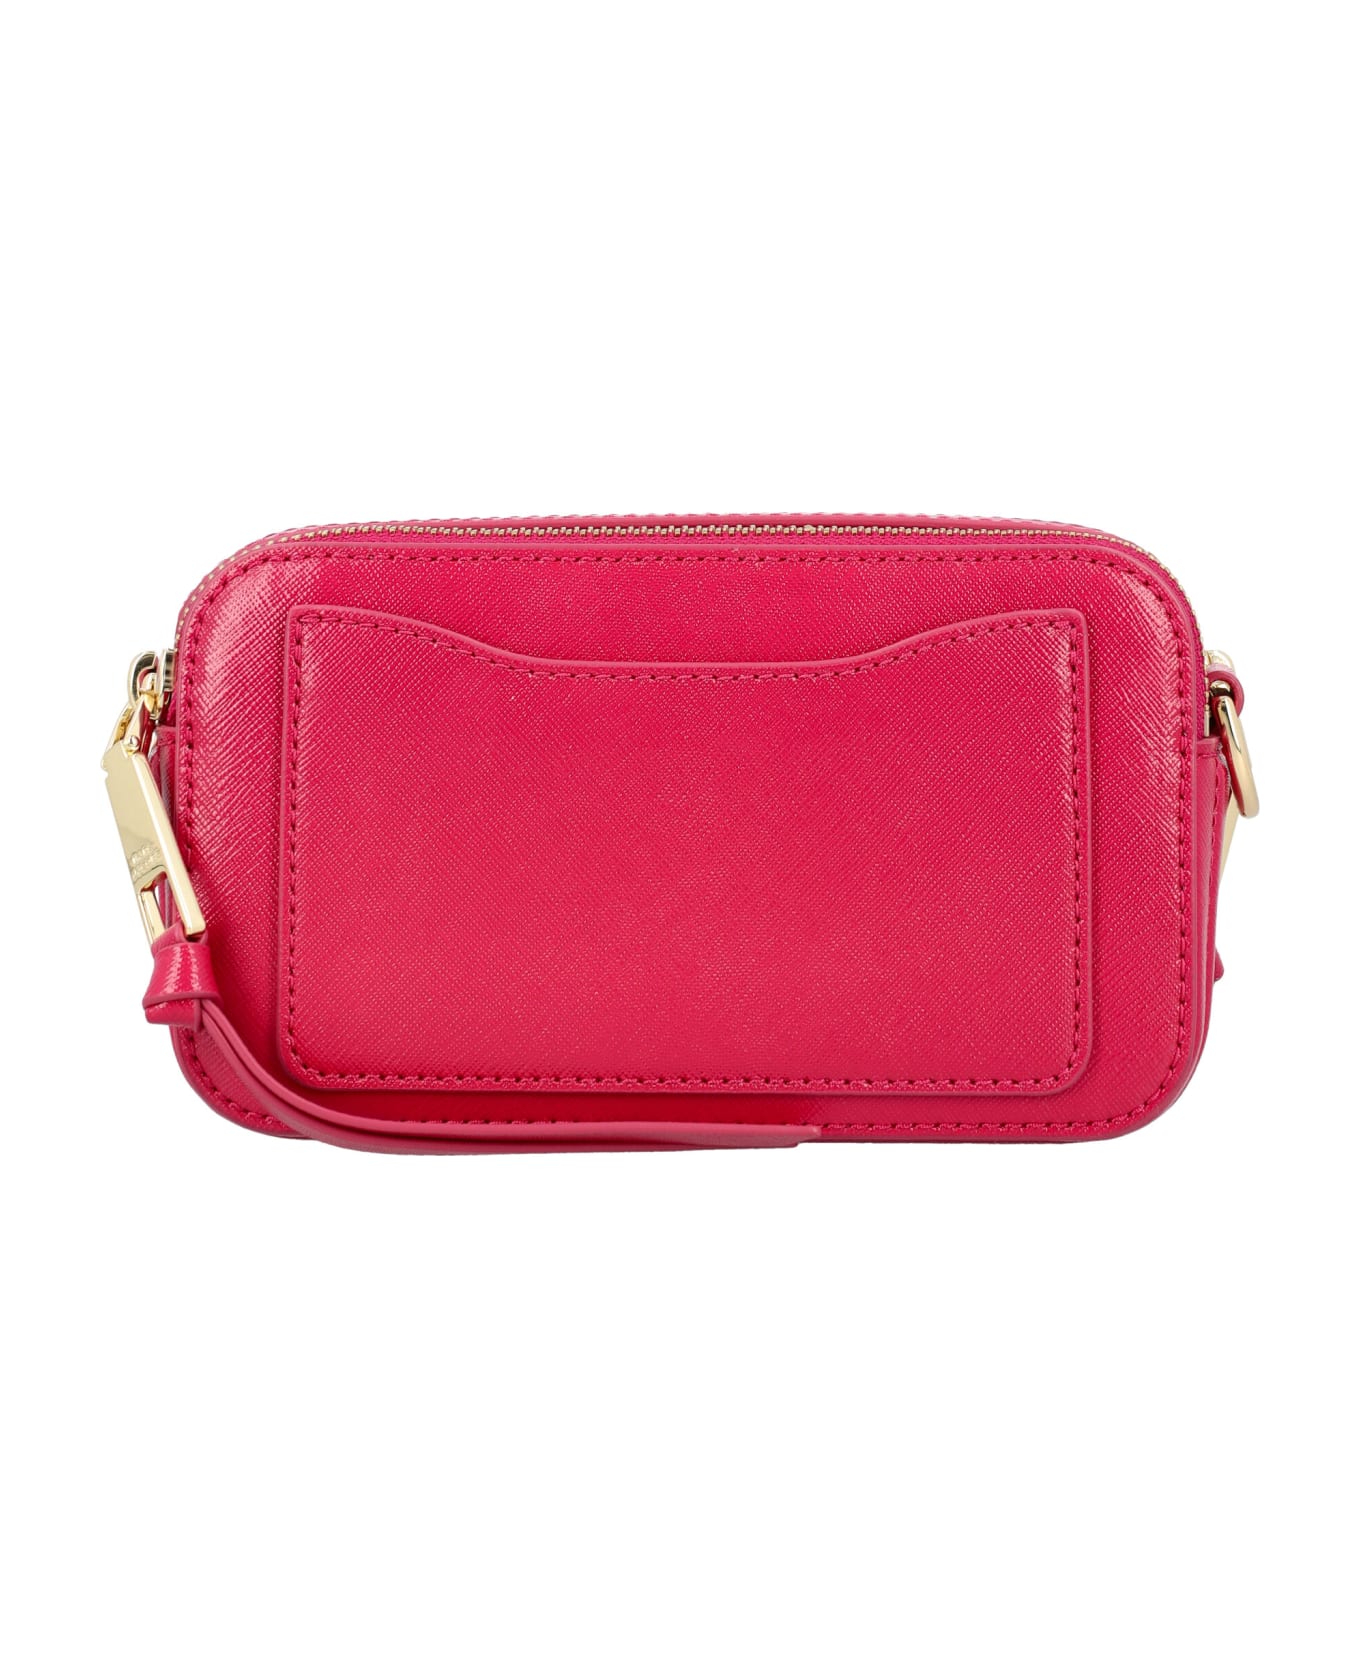 Marc Jacobs The Utility Snapshot - LIPSTICK PINK